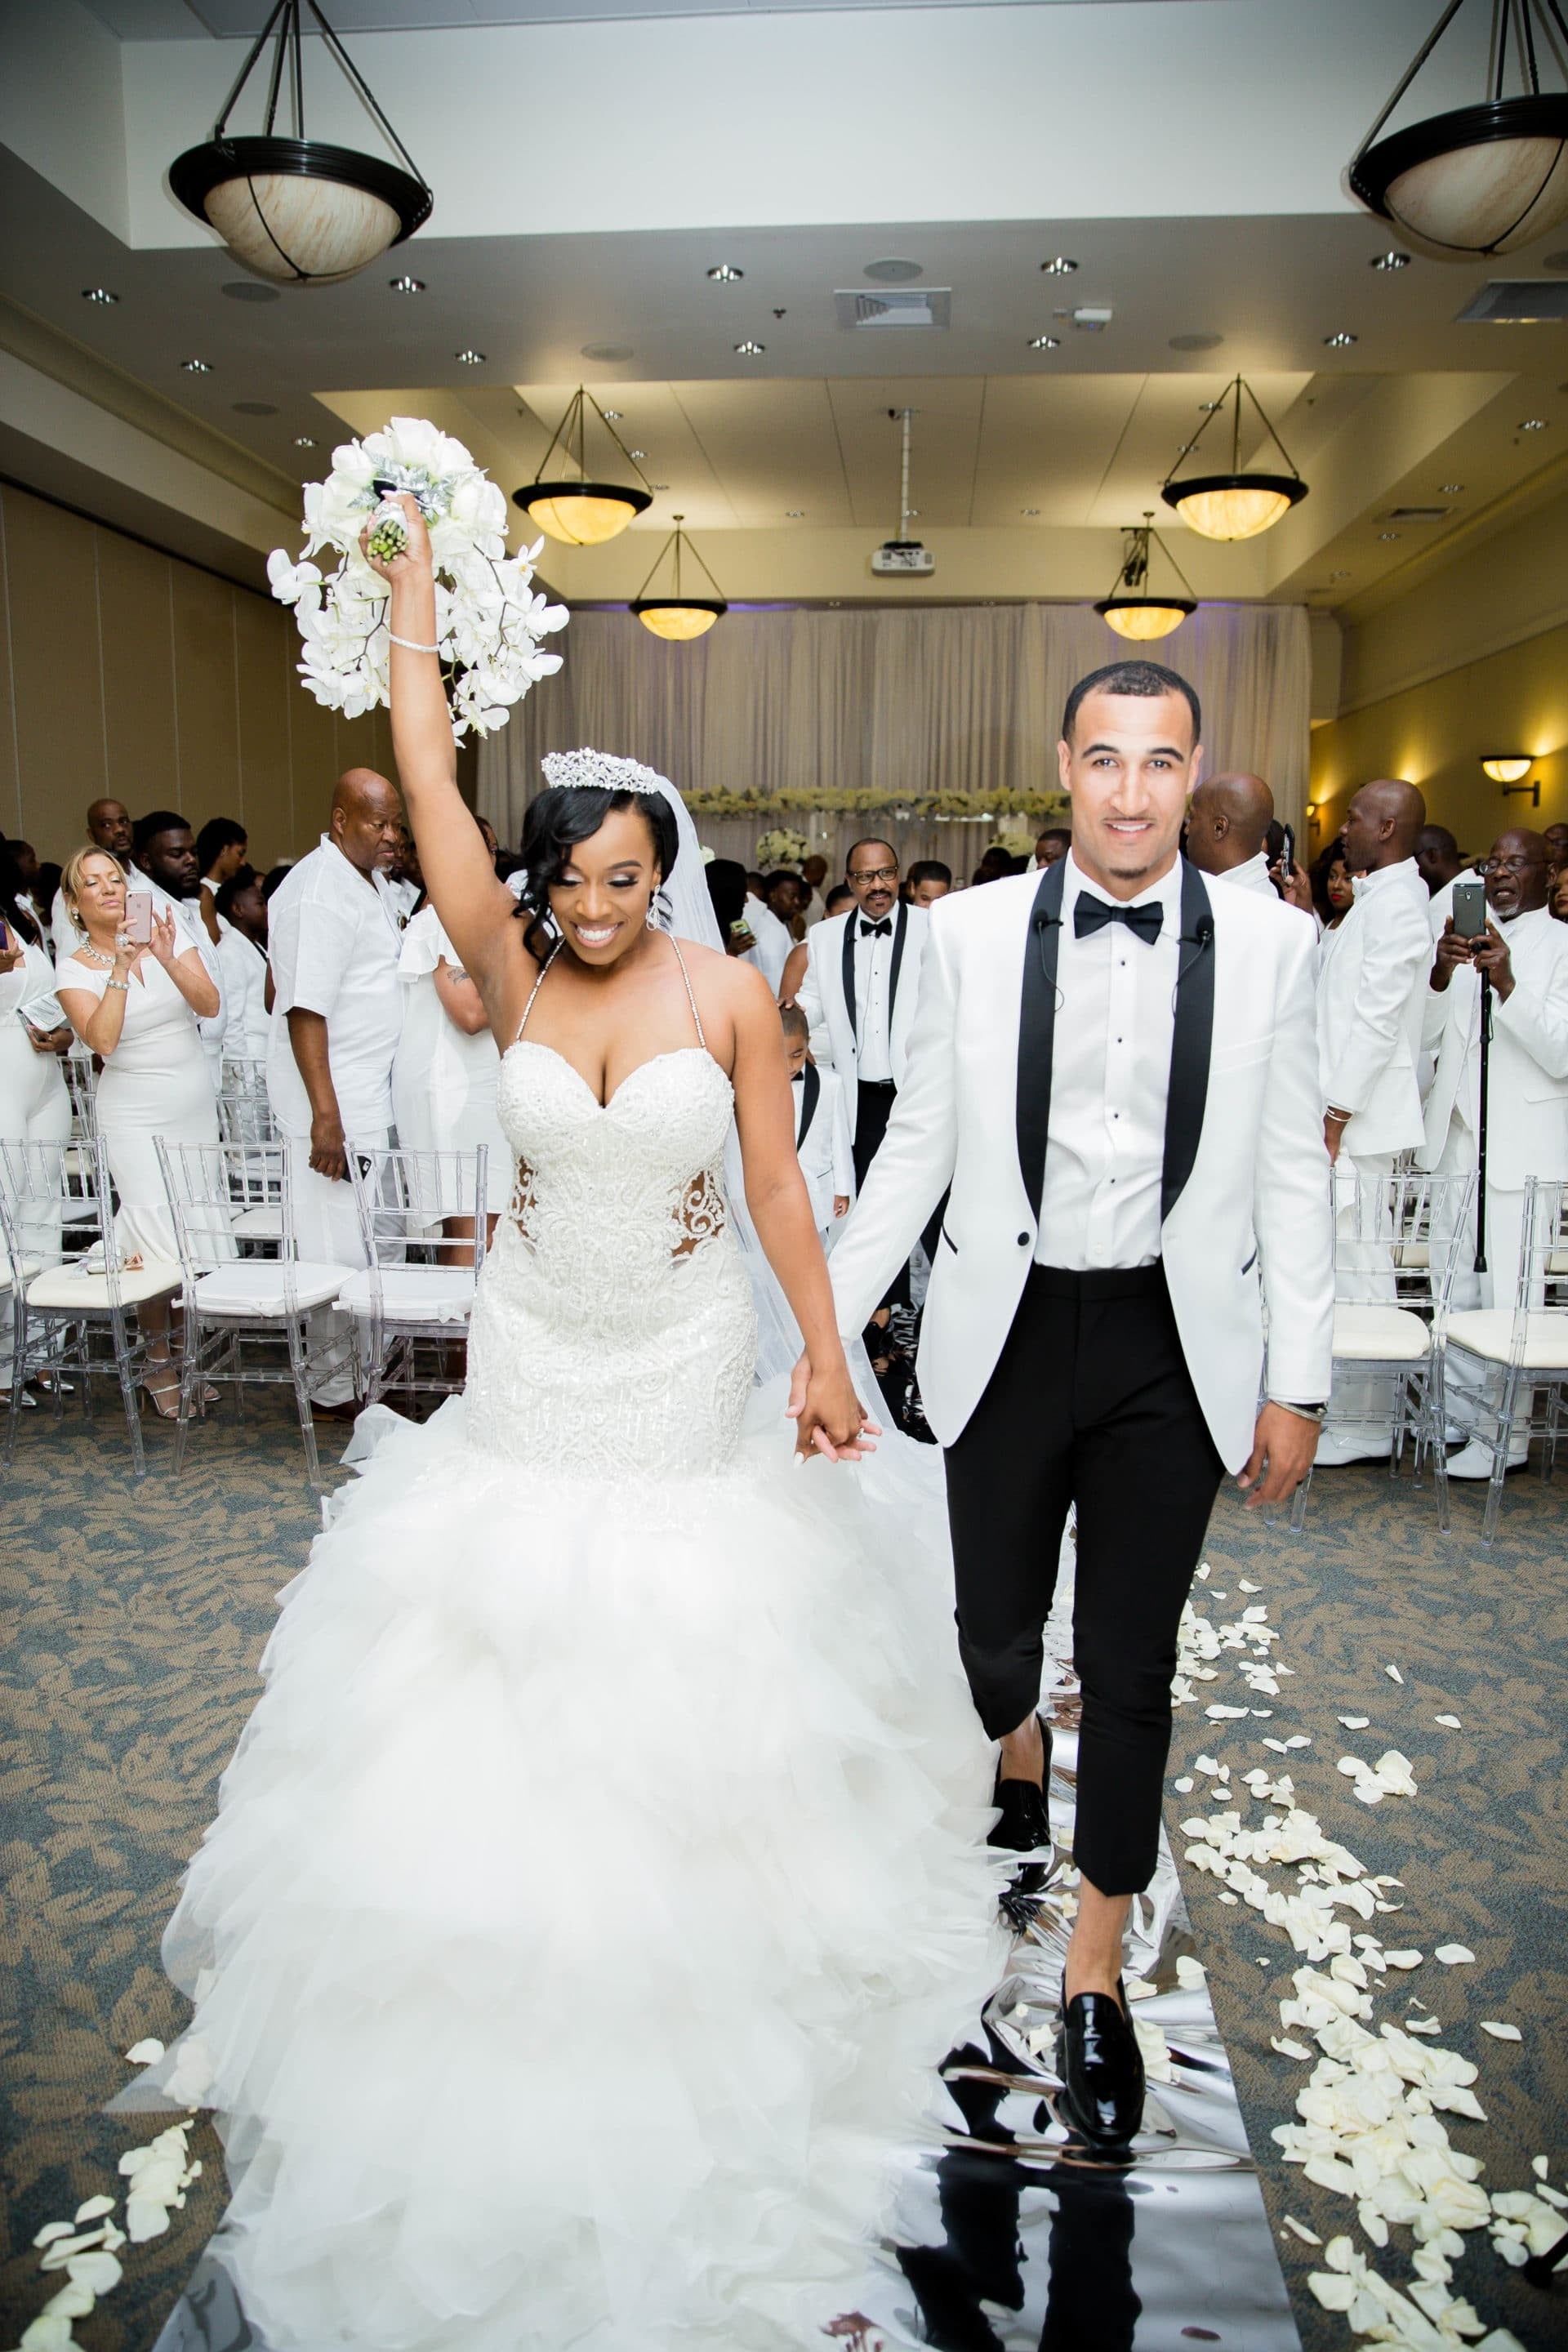 Bridal Bliss: Two Snaps For Altrichia and Anthony's All-White Summer Wedding